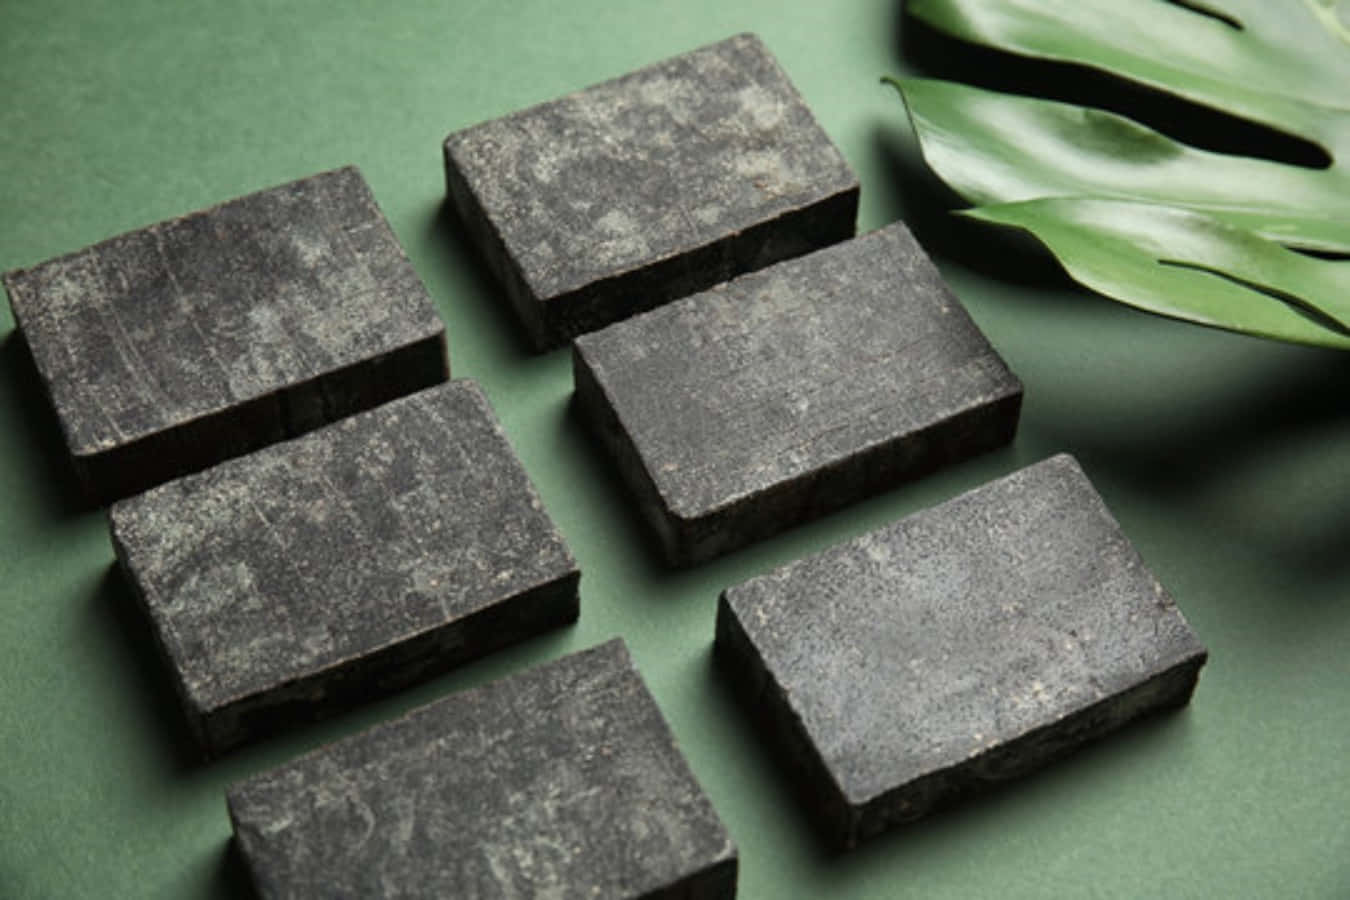 Get your glow back with all-natural black soap! Wallpaper